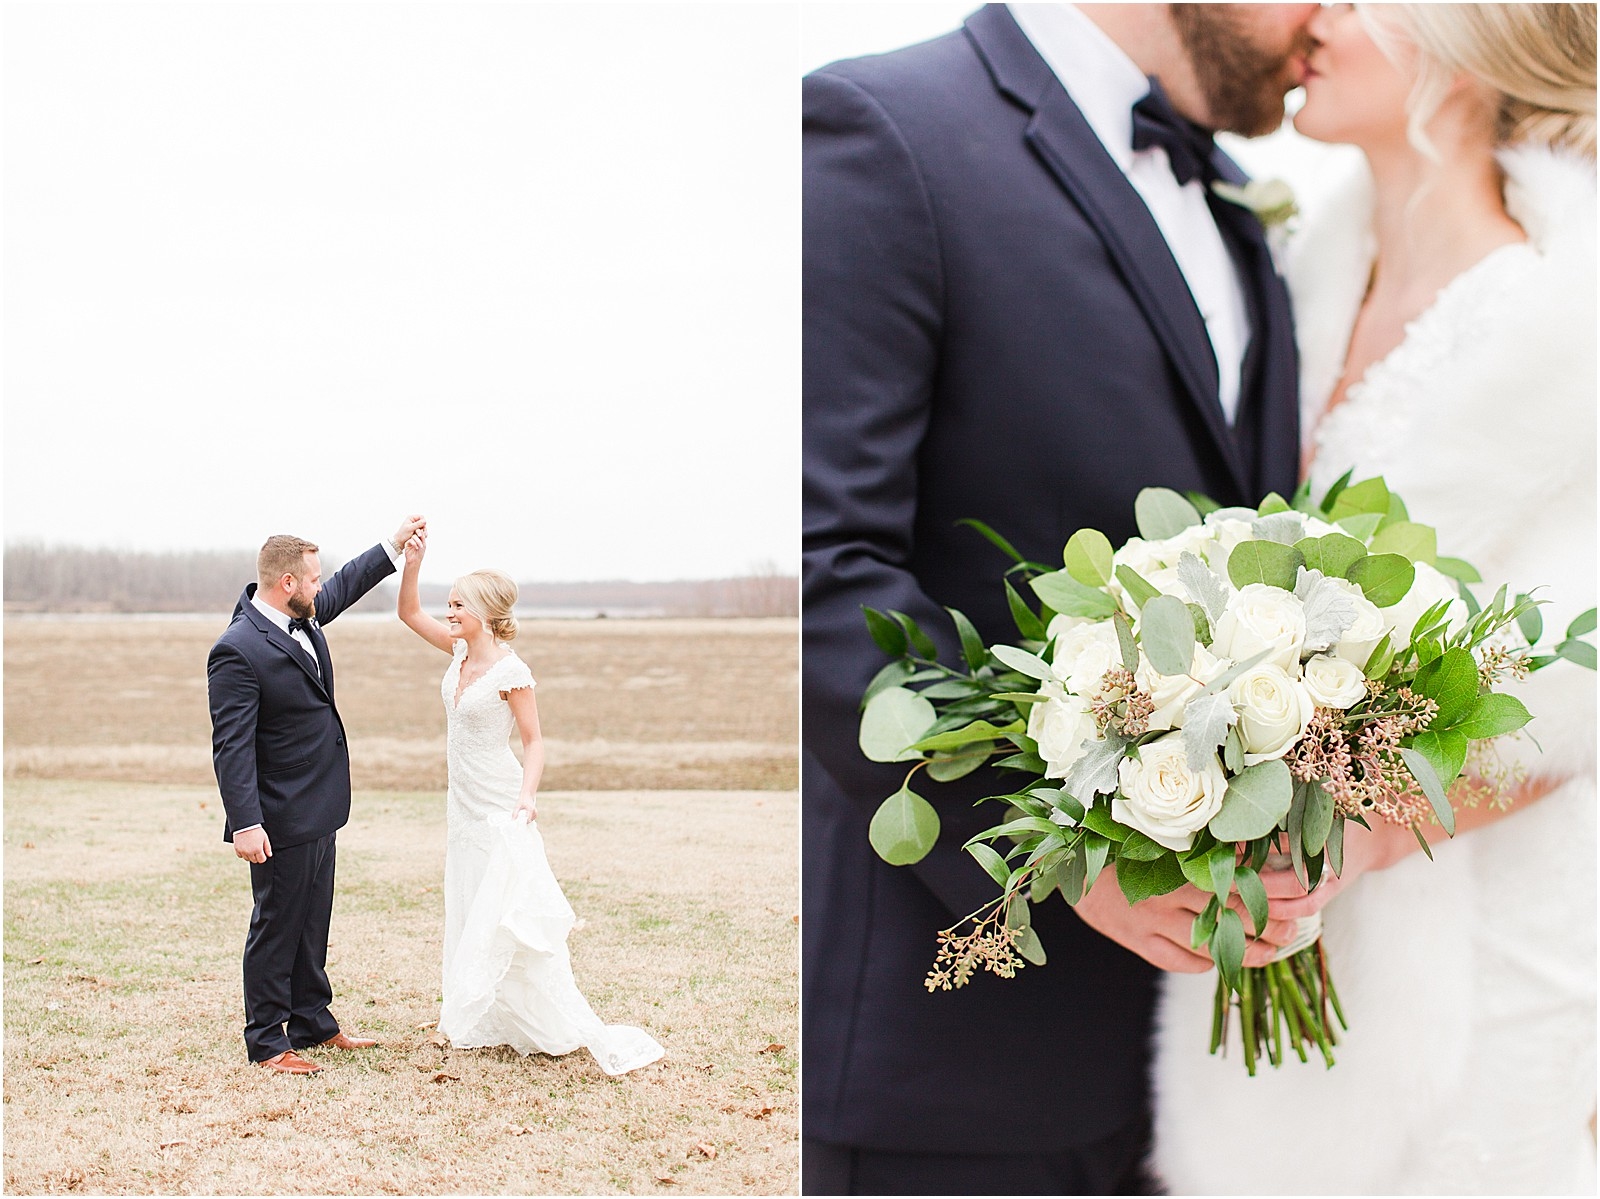 A Classic Winter Wedding in New Harmony | Rachel and Ryan | Bret and Brandie Photography 0102.jpg